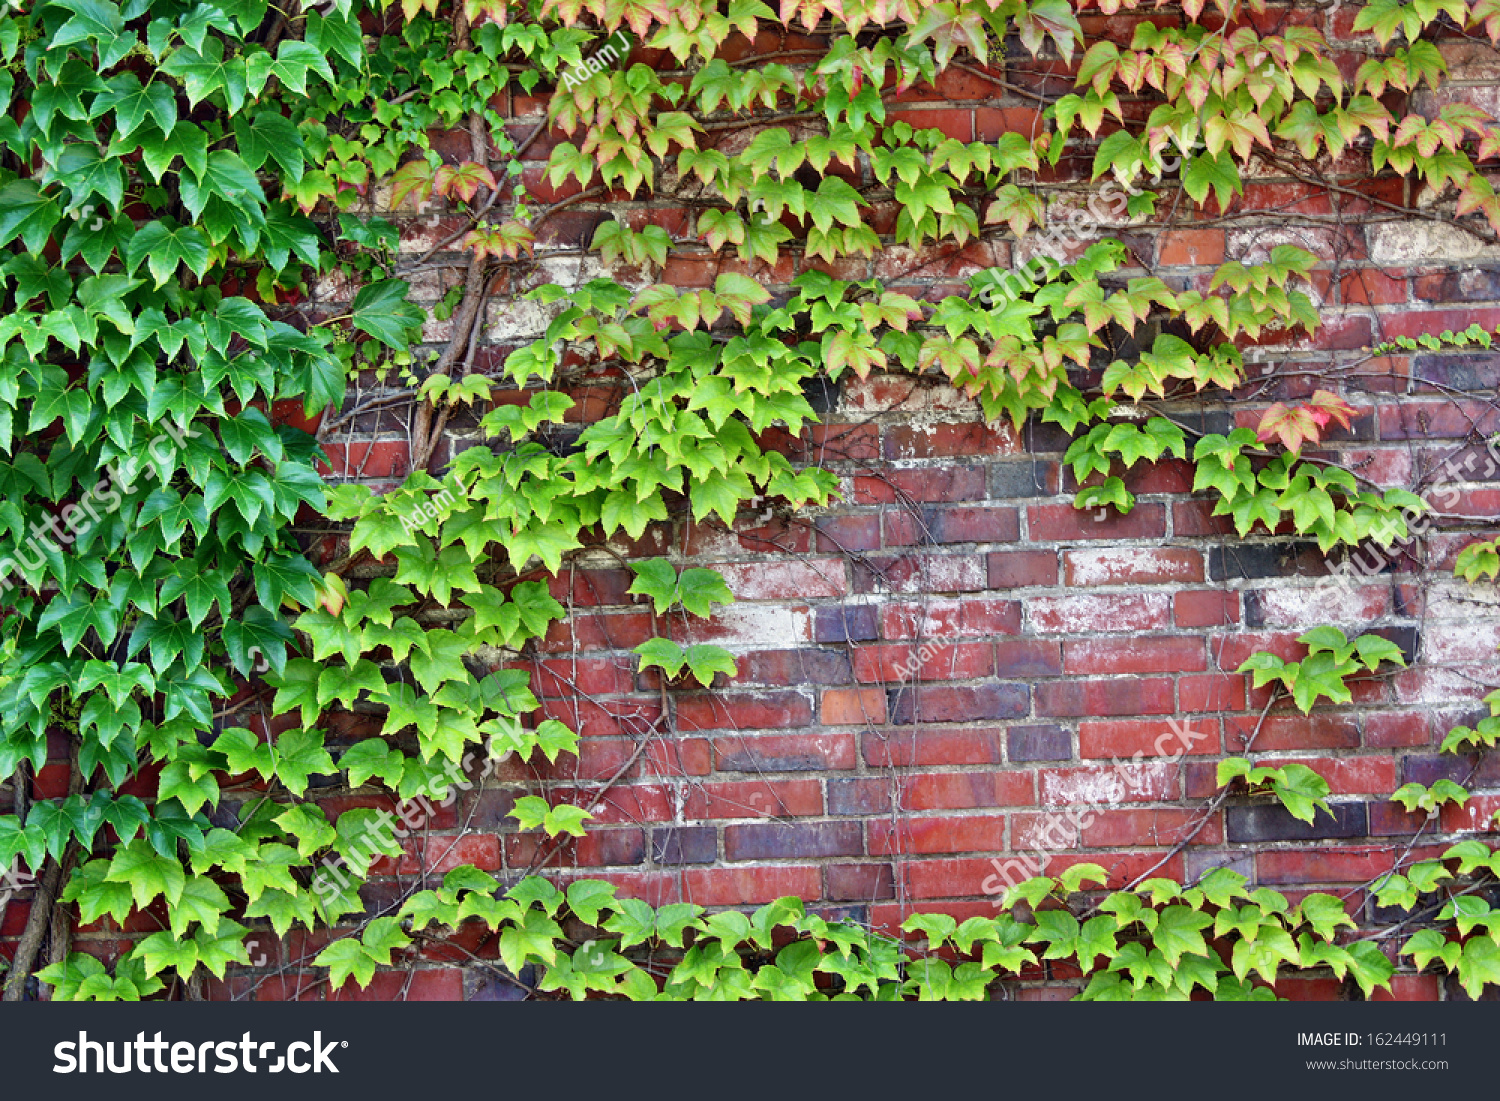 Wall Castle Palace Overgrown Ivy Plants Stock Photo 162449111 ...